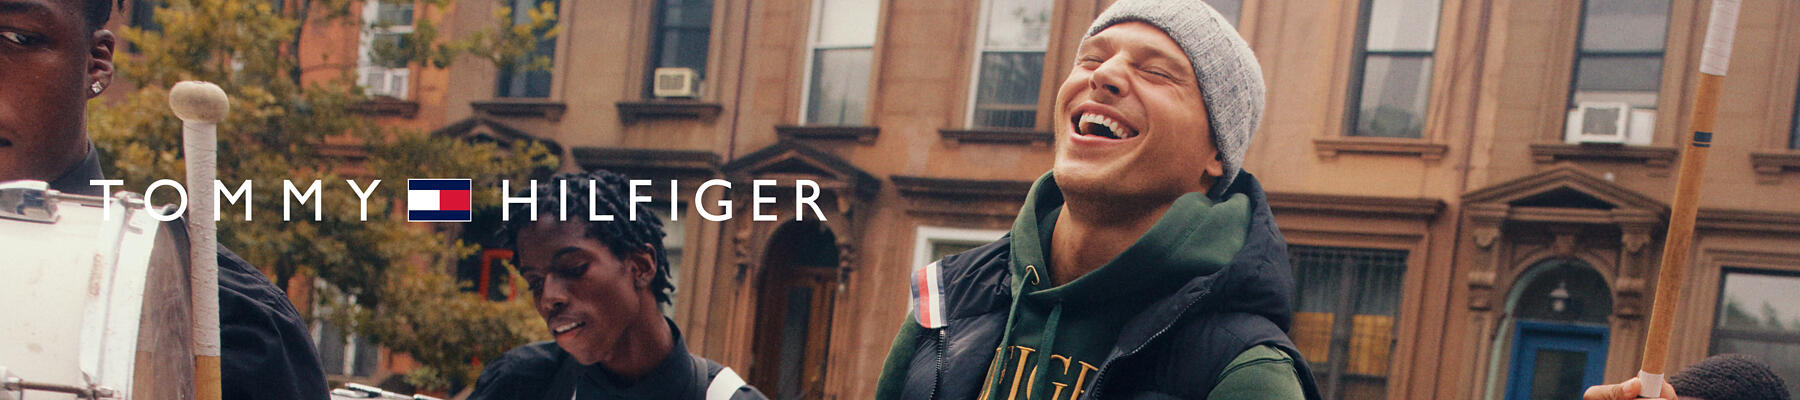 Tommy Hilfiger has been delivering fashion since 1985.